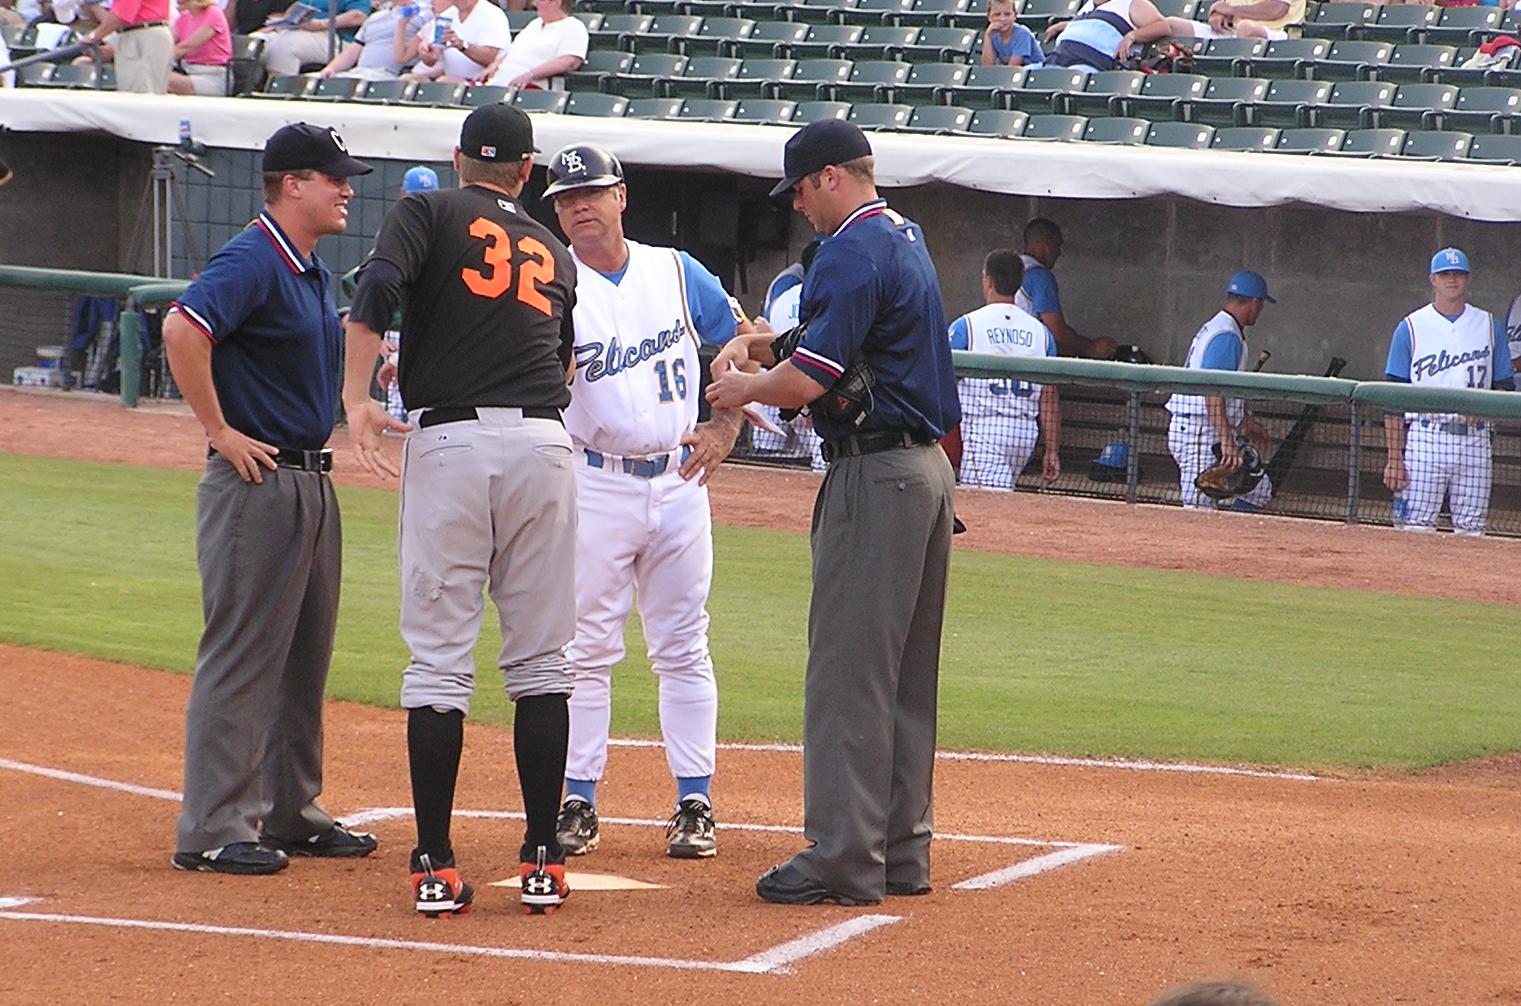 Exchanging the Line Ups - Myrtle Beach, SC